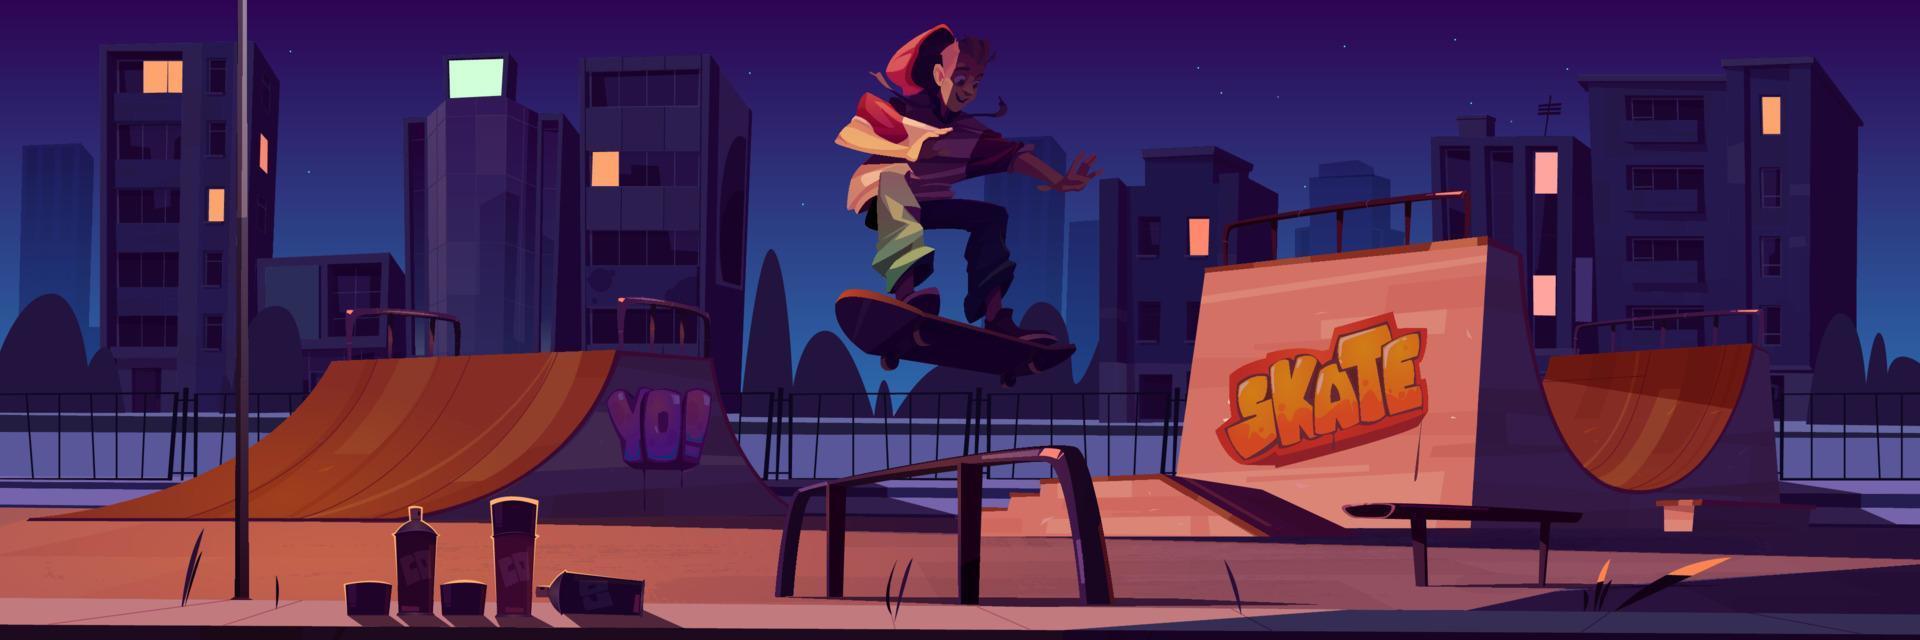 Skate park with boy riding on skateboard at night vector